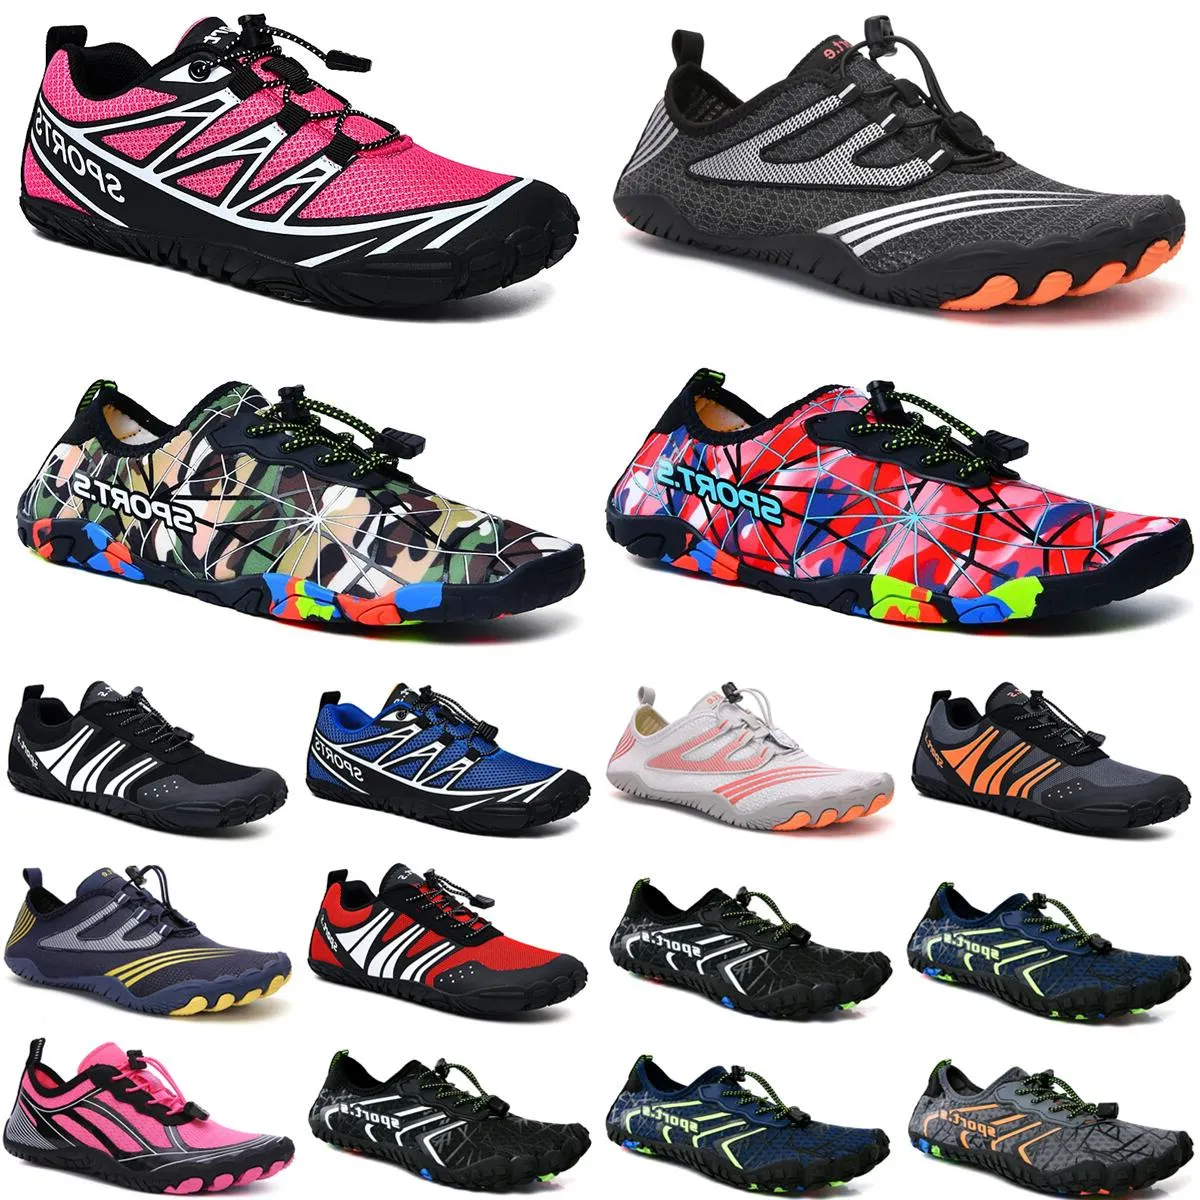 Water Shoes black white orange Women men shoes Beach sea blue Swim Diving Outdoor red pink Barefoot Quick-Dry size eur 36-45